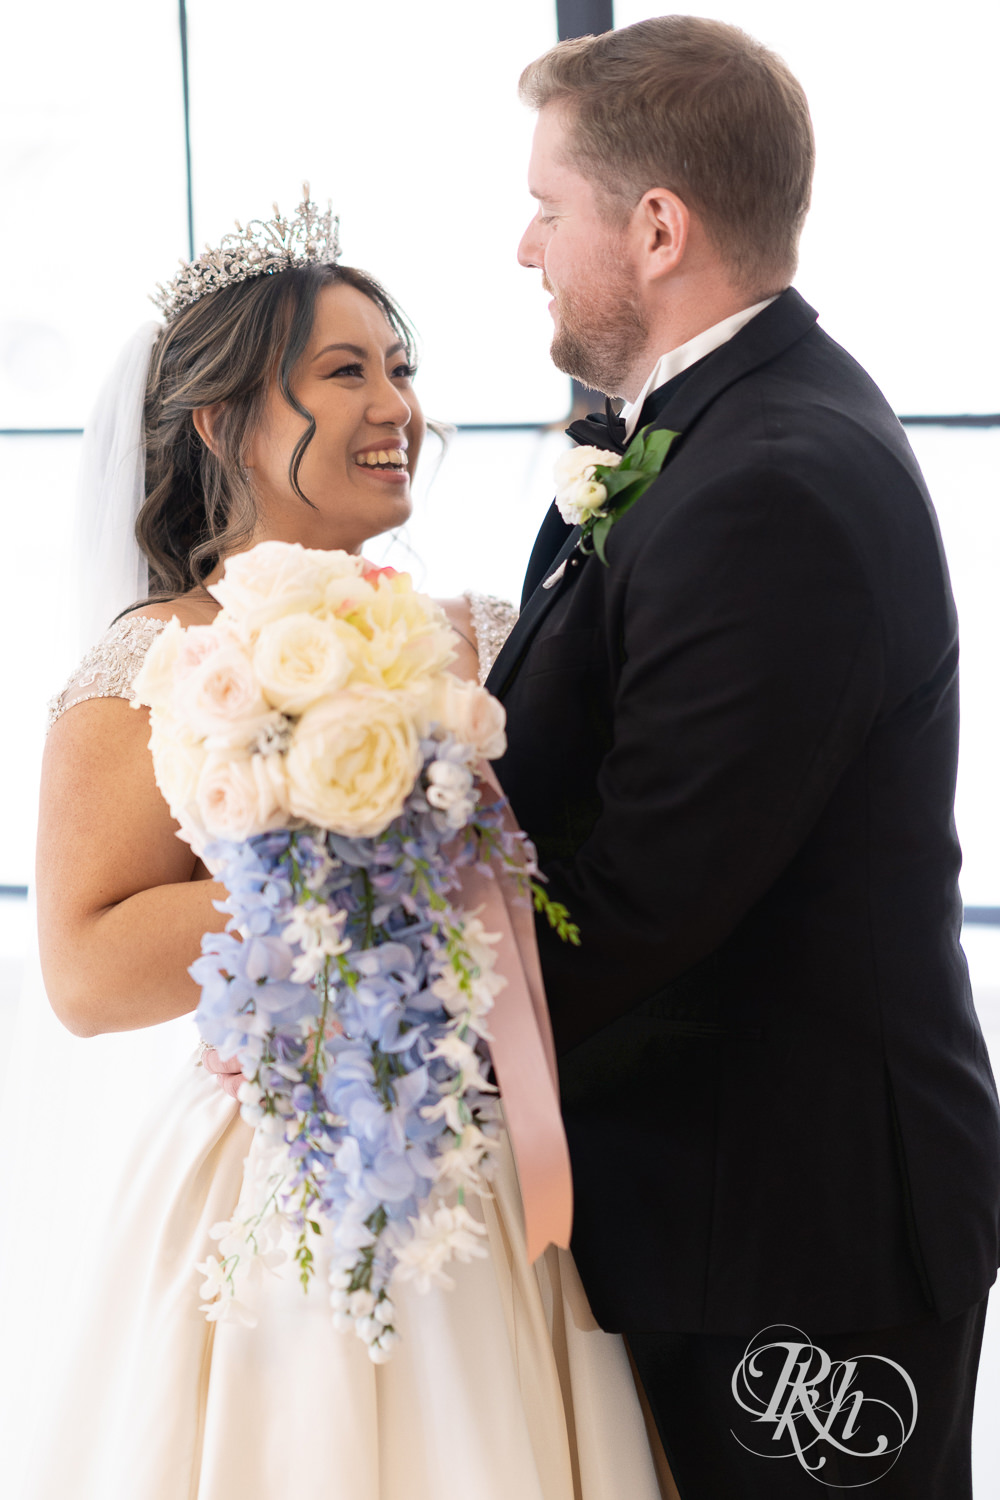 Hmong bride and groom share first look on wedding day at the Saint Paul Athletic Club in Saint Paul, Minnesota.